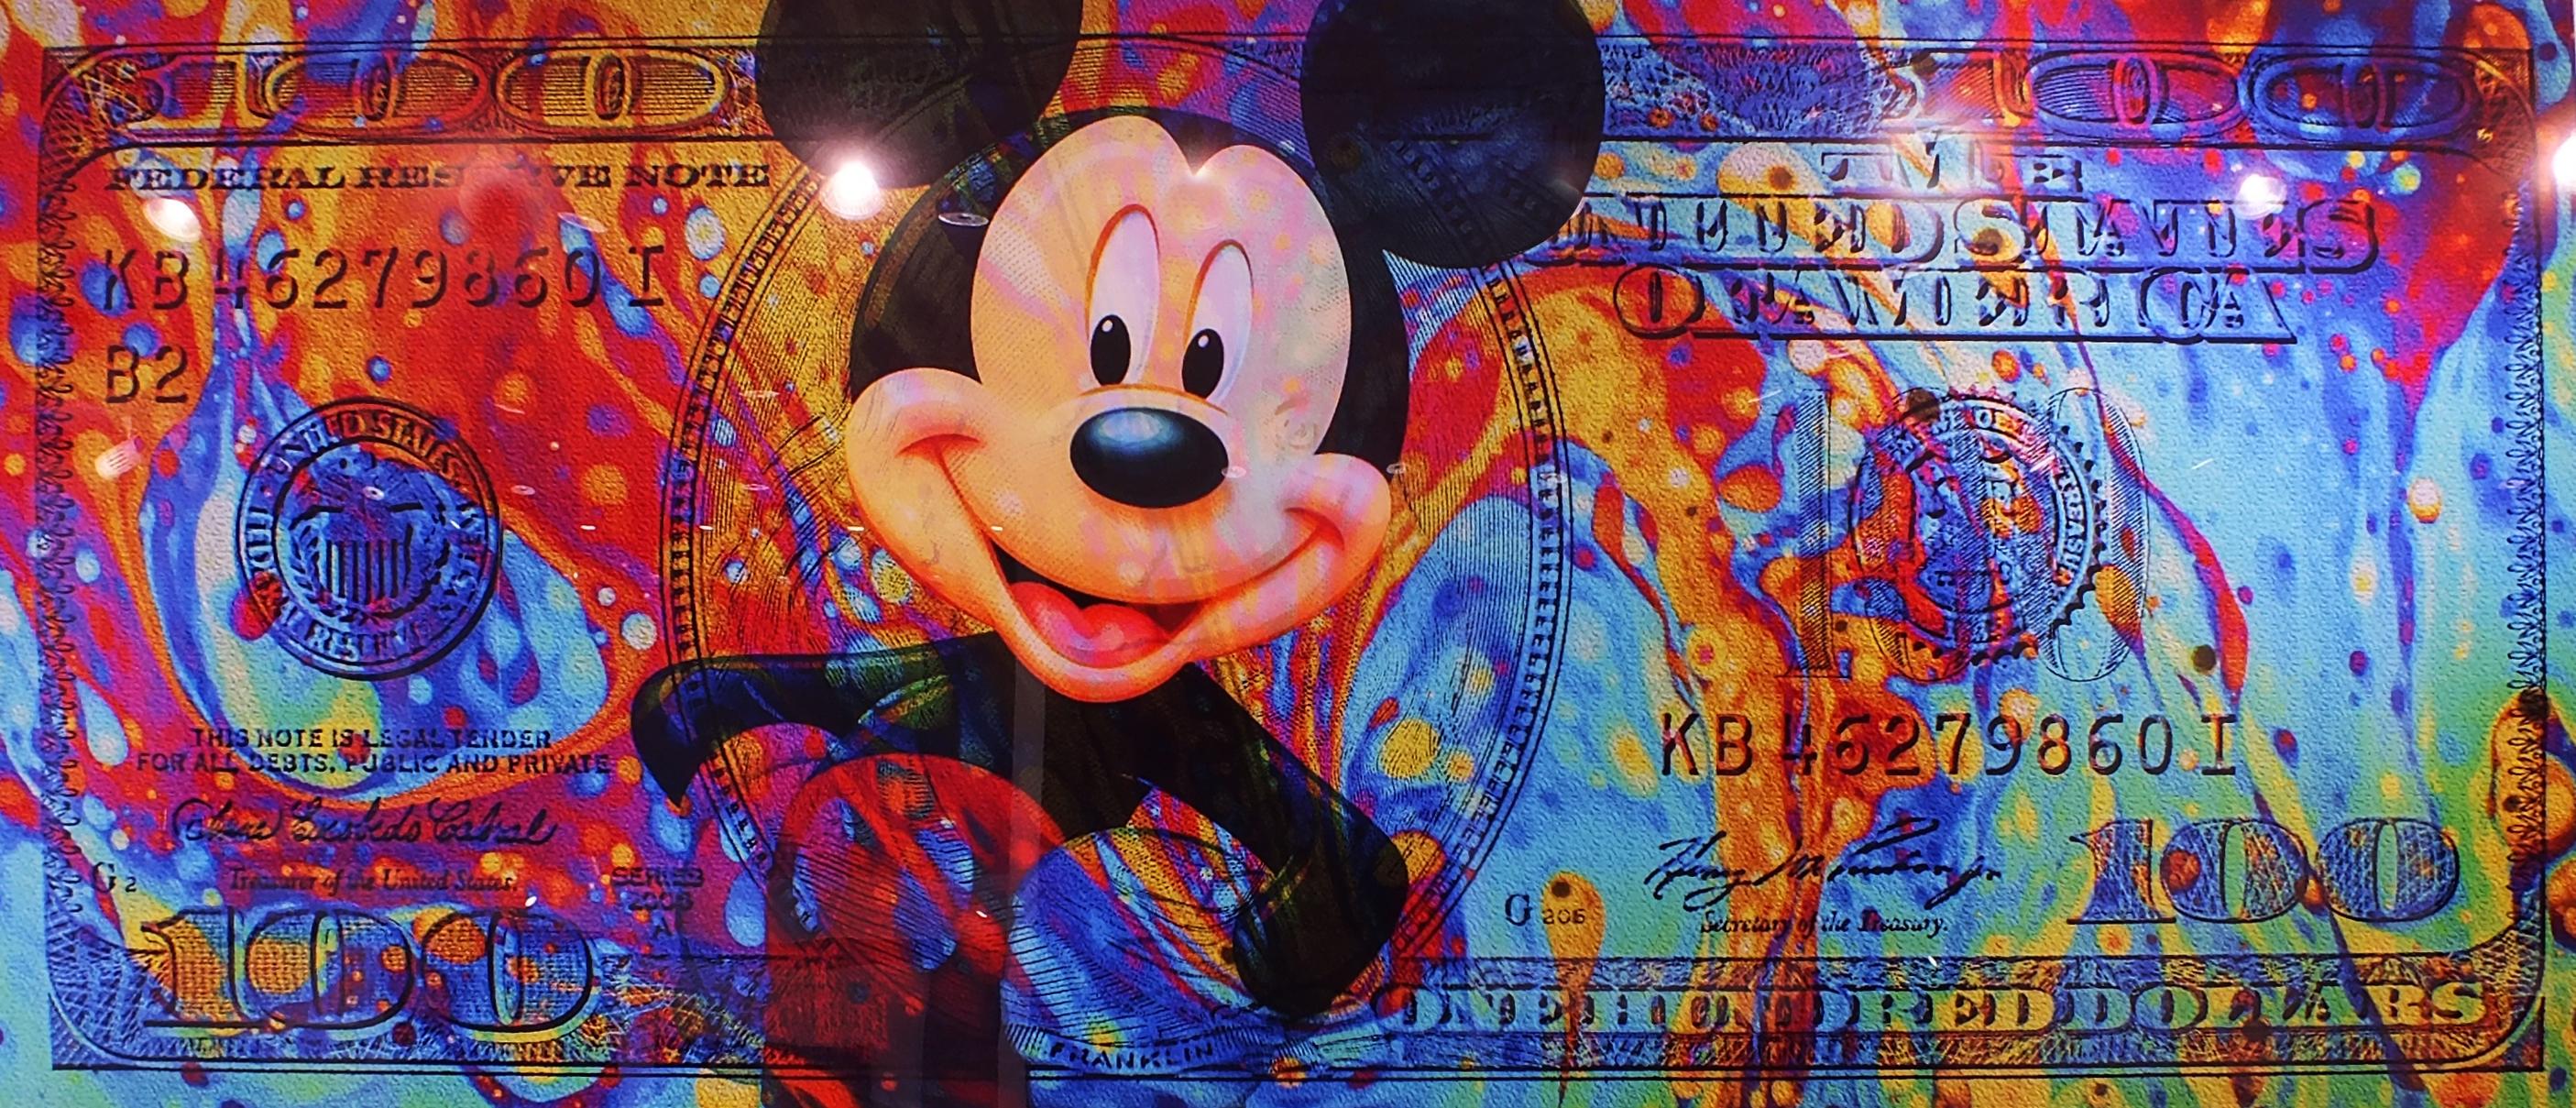 Mickey Cash Culture, Acrylic on Giclee - Mixed Media Art by SQRA